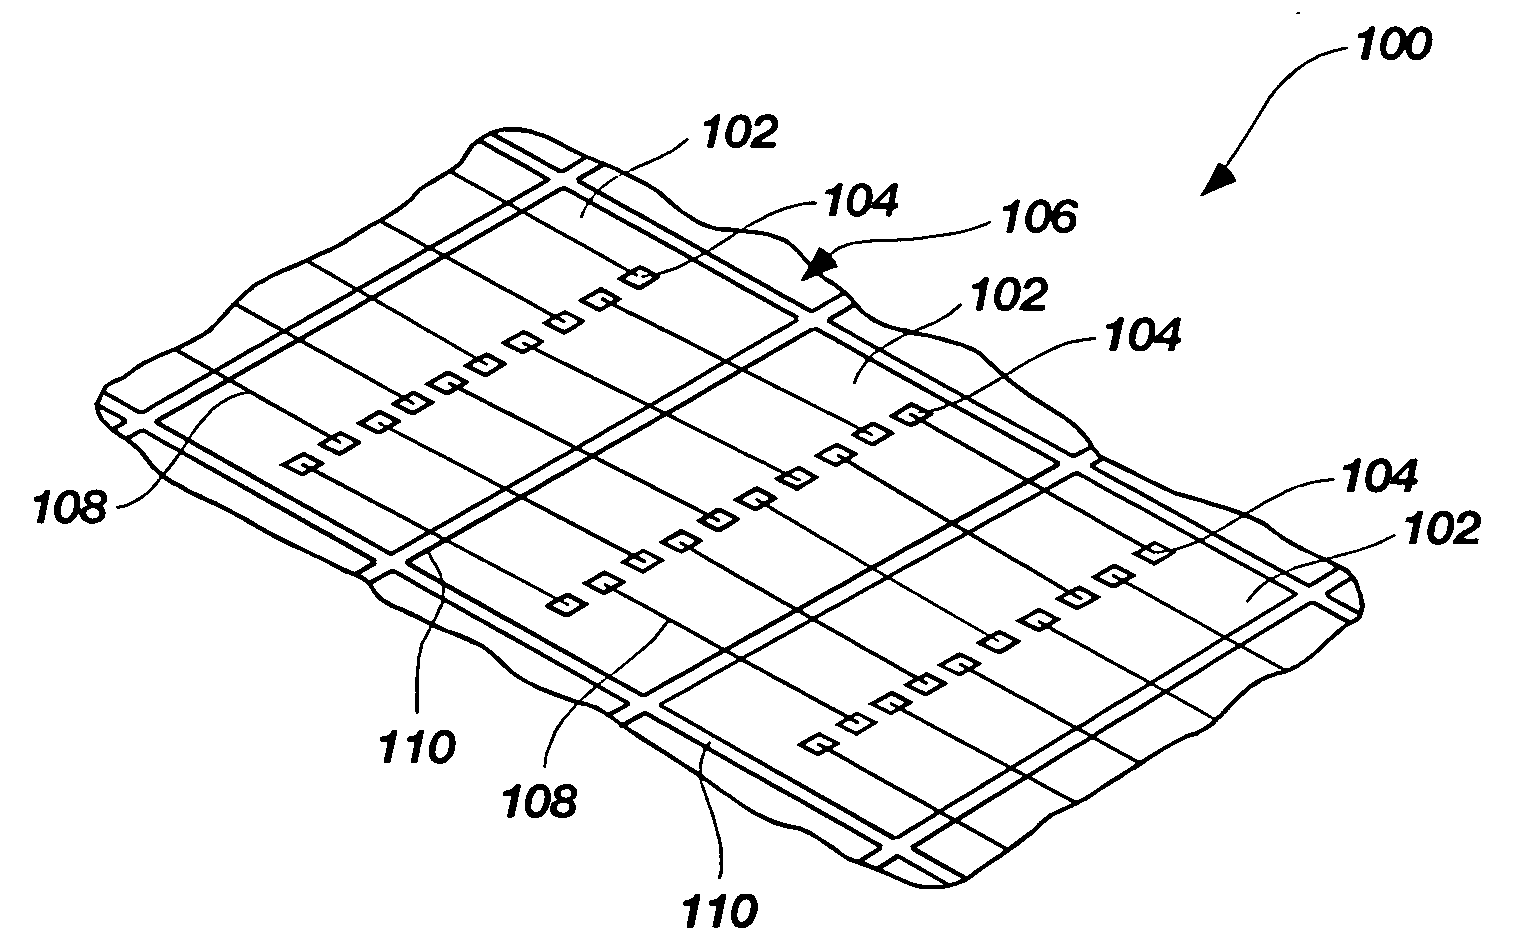 Die package and probe card structures and fabrication methods